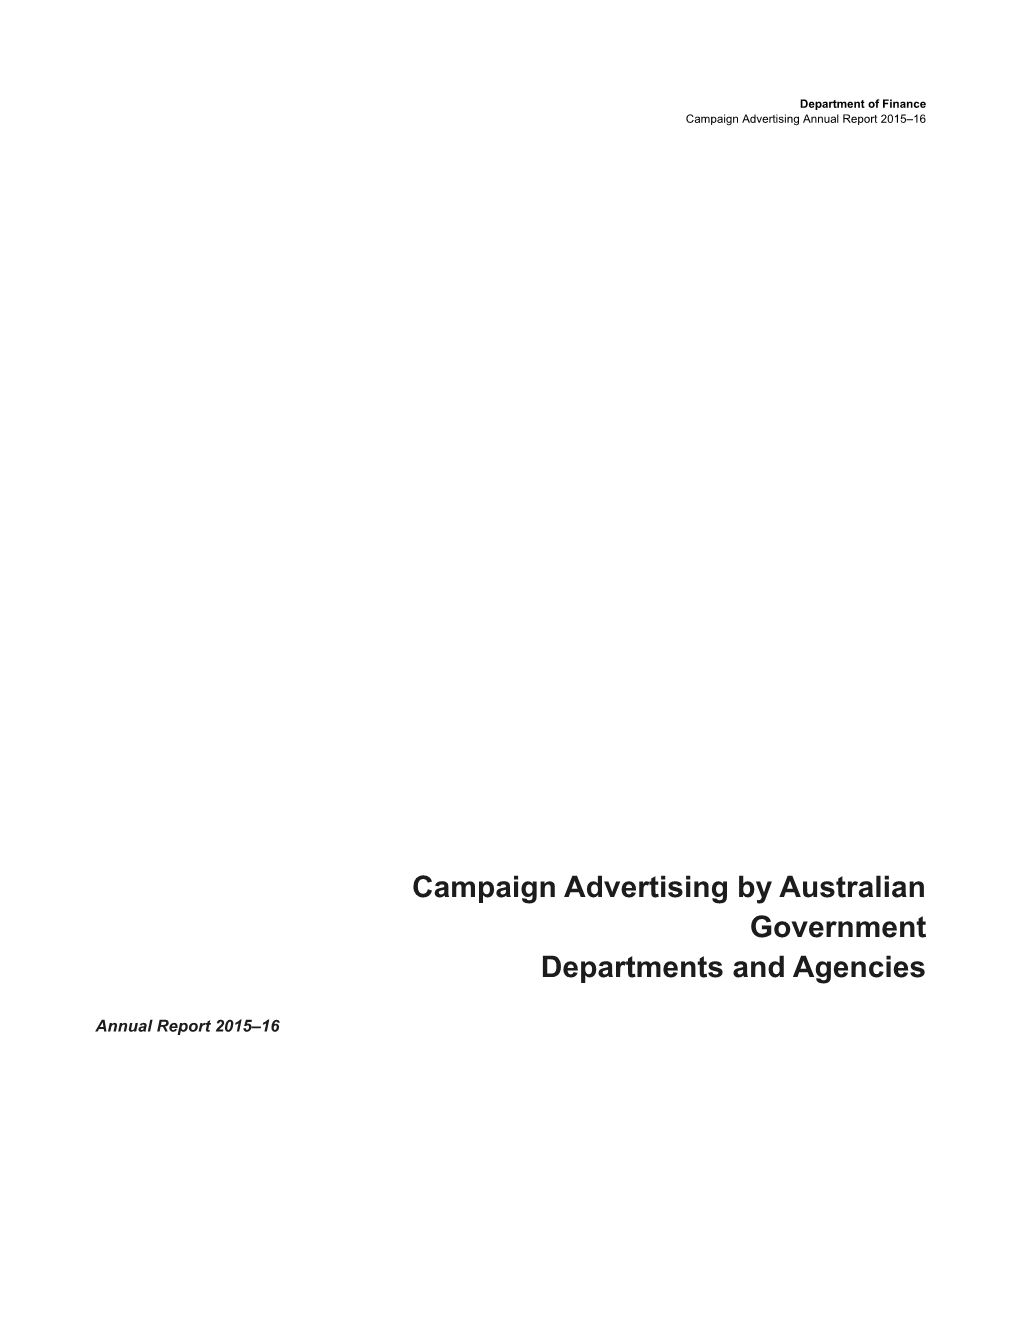 Campaign Advertising by Australian Government Departments and Agencies - Annual Report 2015-16